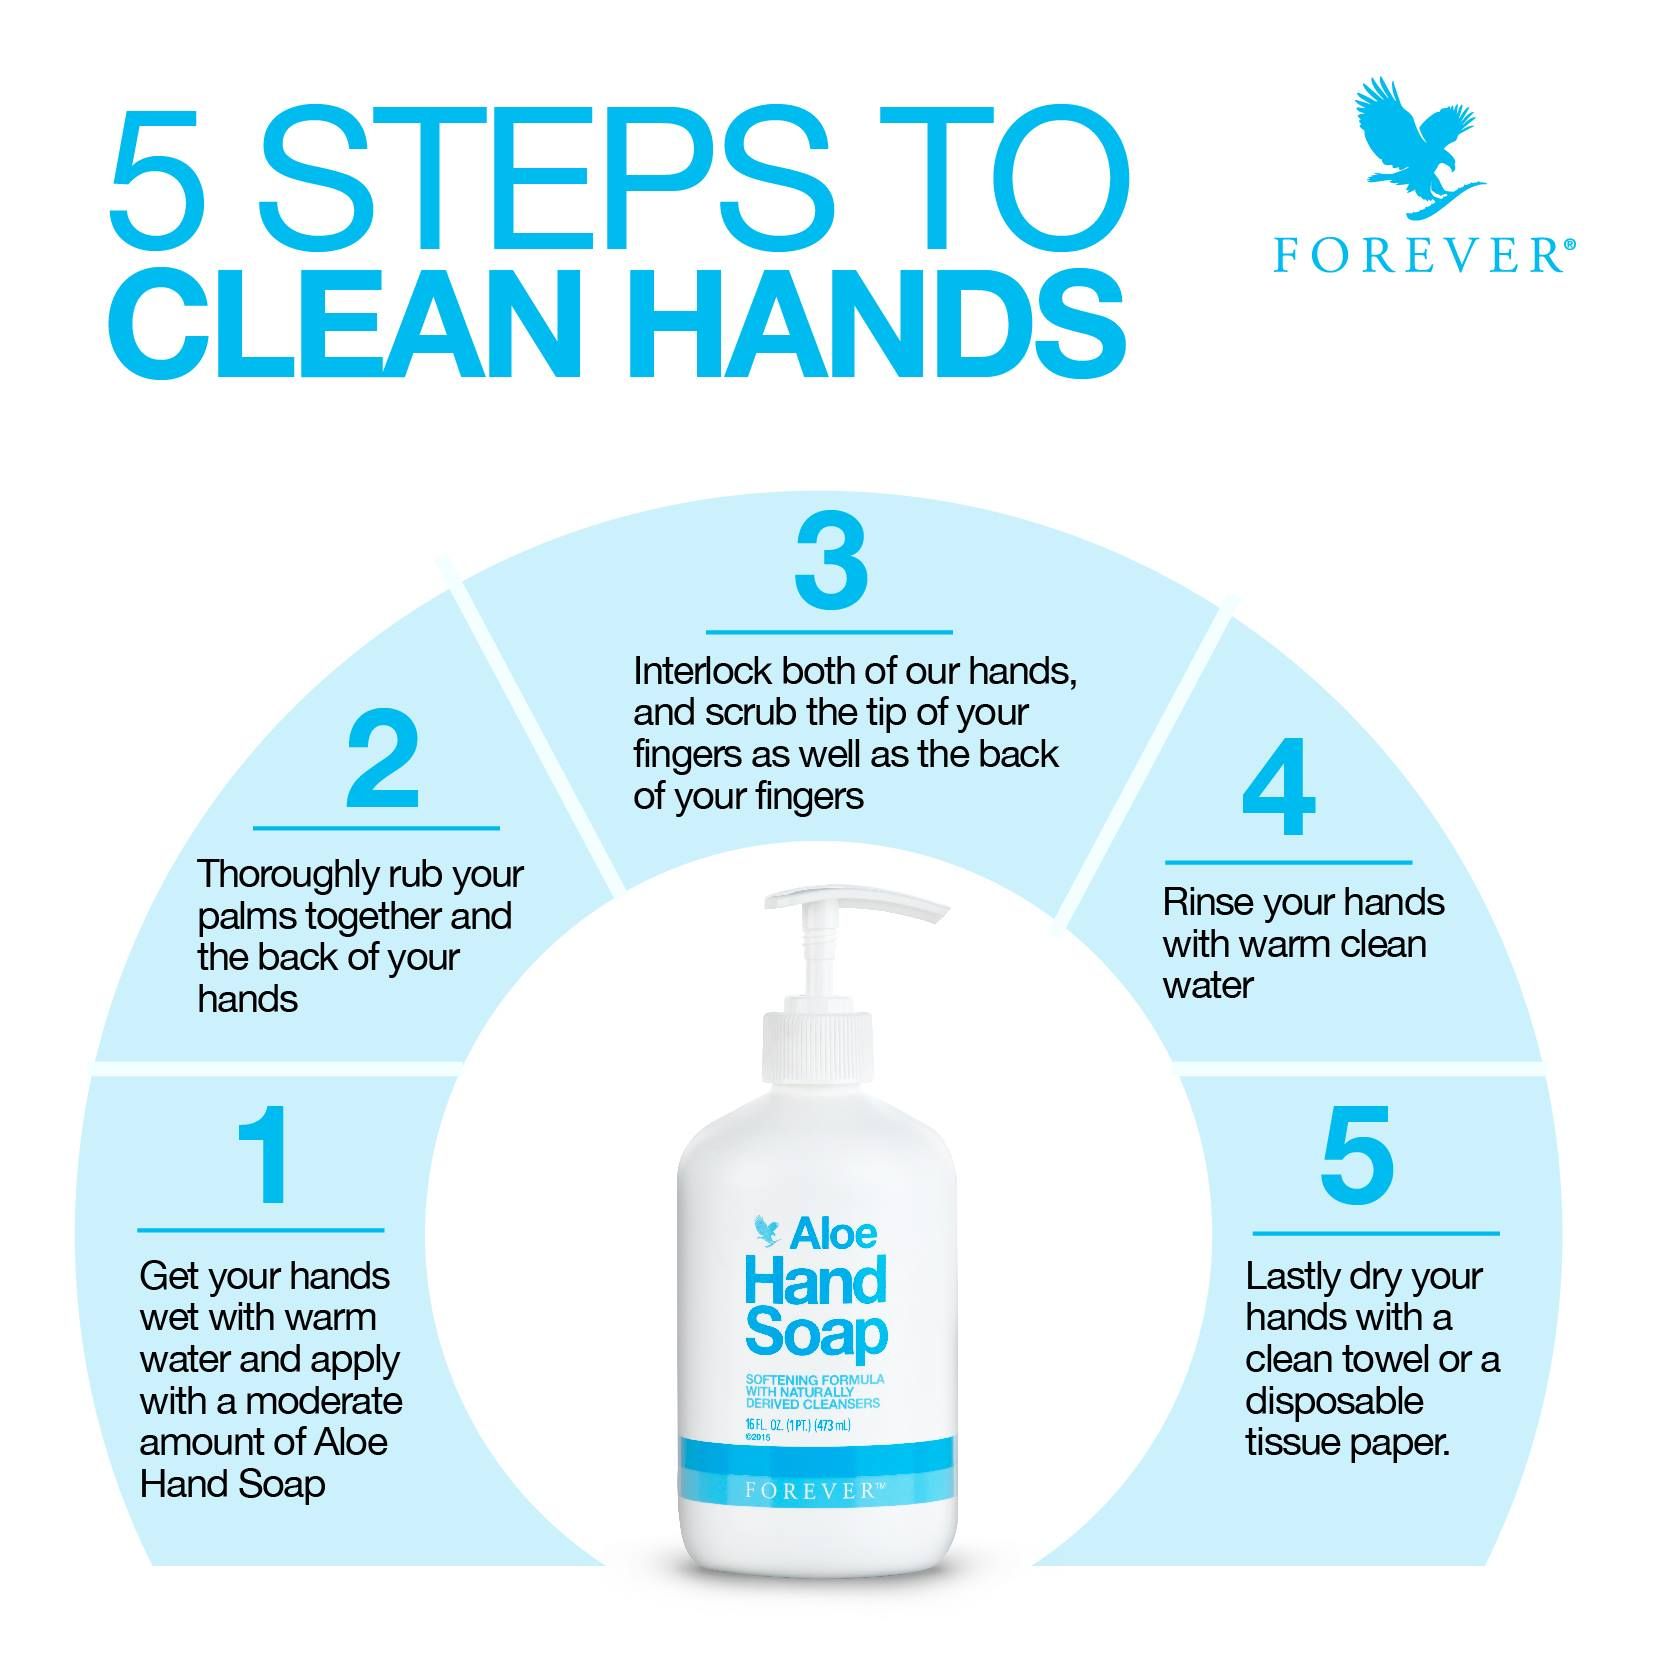 Here are 5 steps to clean hands using aloe hand soap! | Forever living products, Forever products, Forever living aloe vera